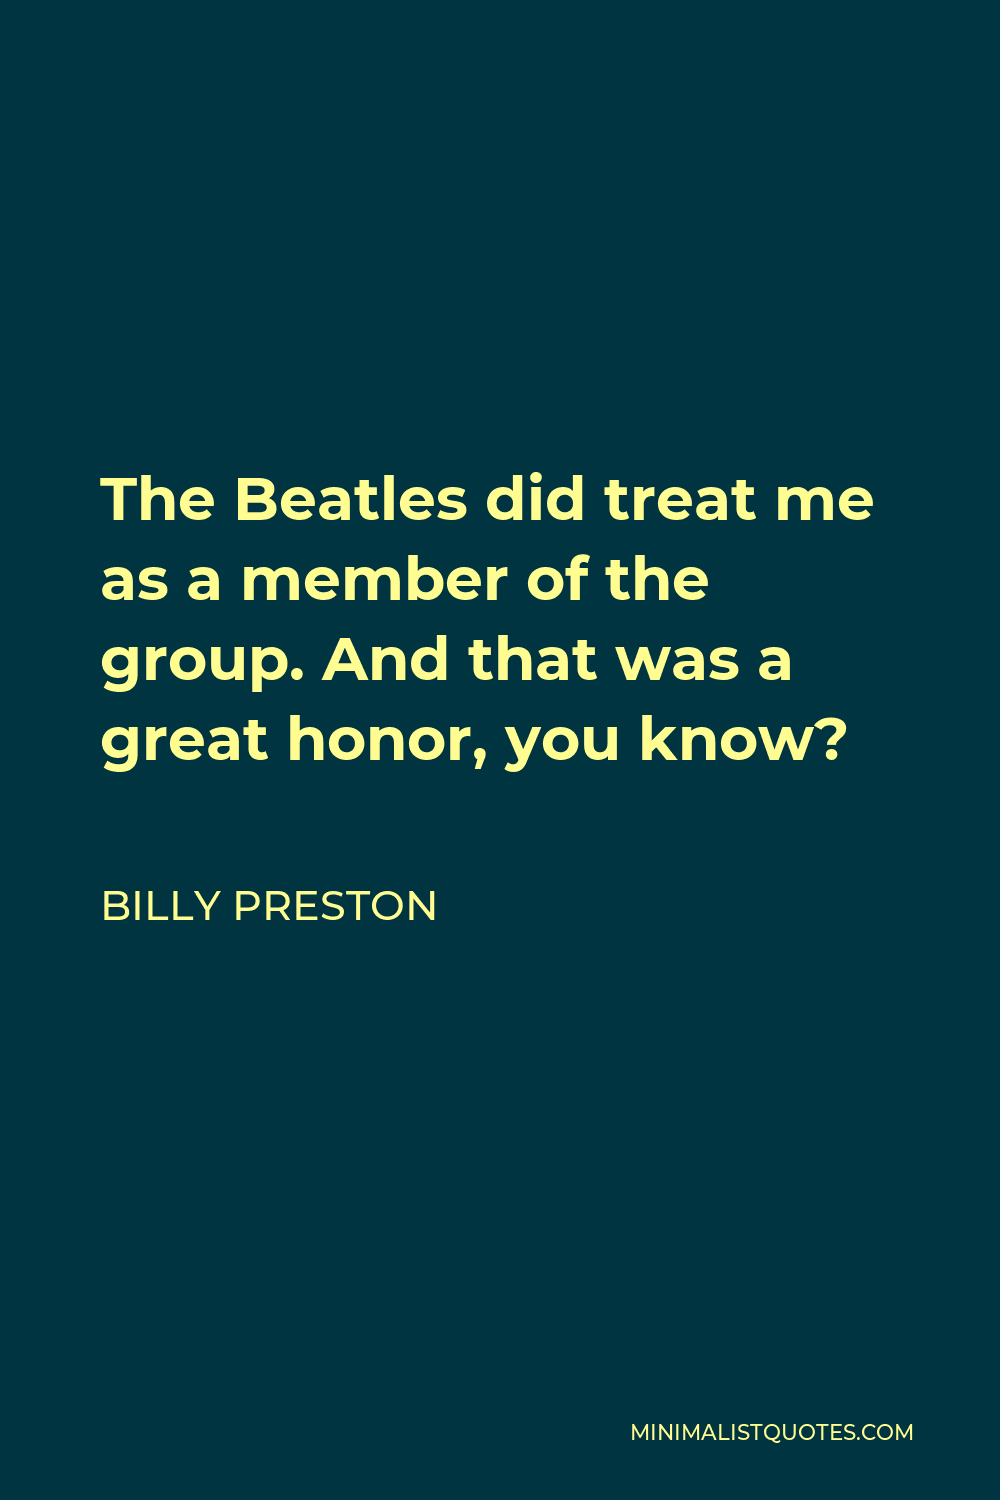 Billy Preston Quote - The Beatles did treat me as a member of the group. And that was a great honor, you know?